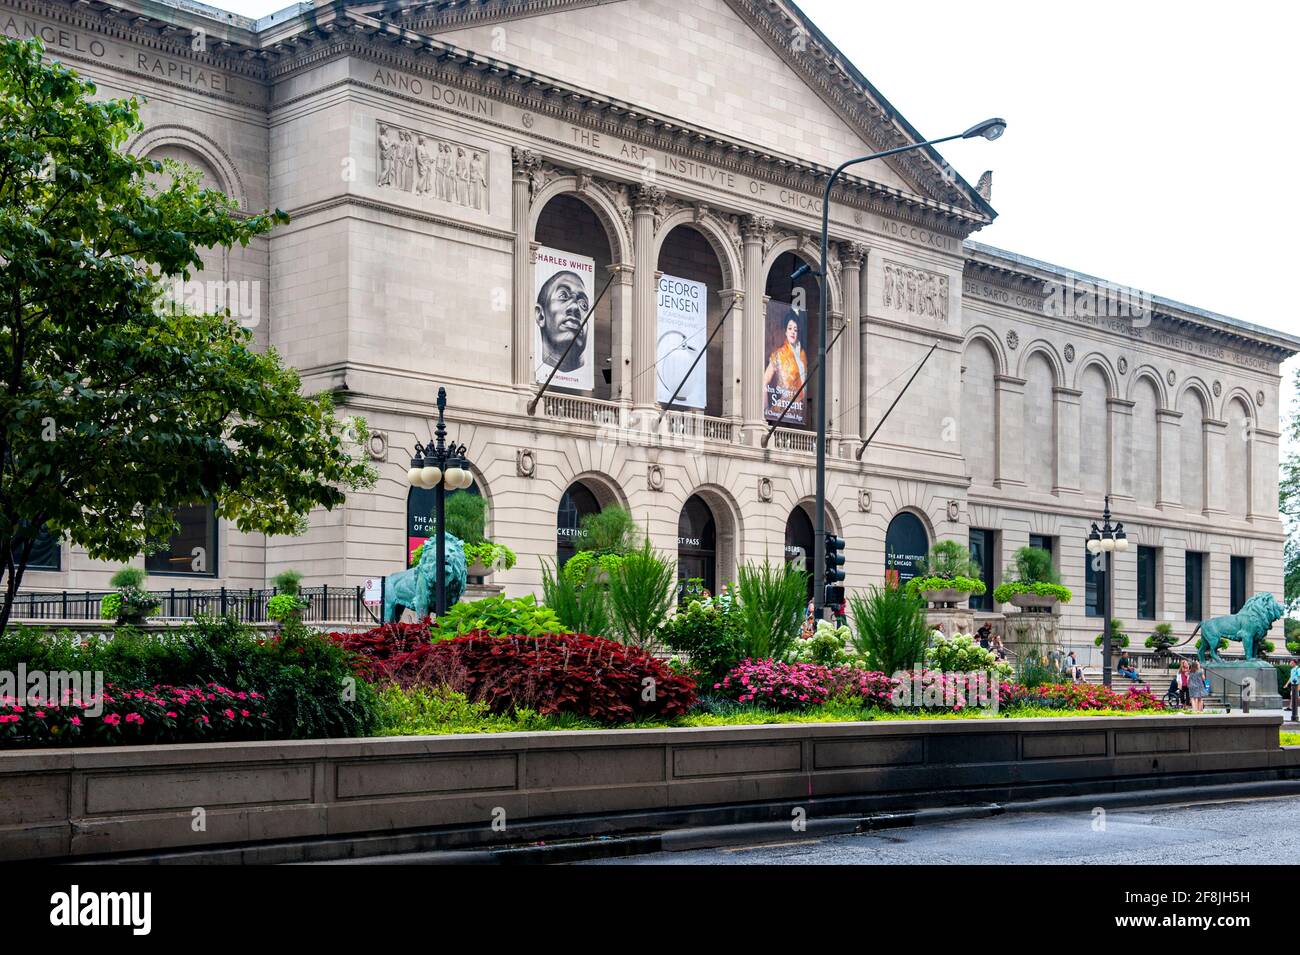 View the Art Institute of Chicago building from across Michigan Avenue with a planted median in the foreground. Stock Photo